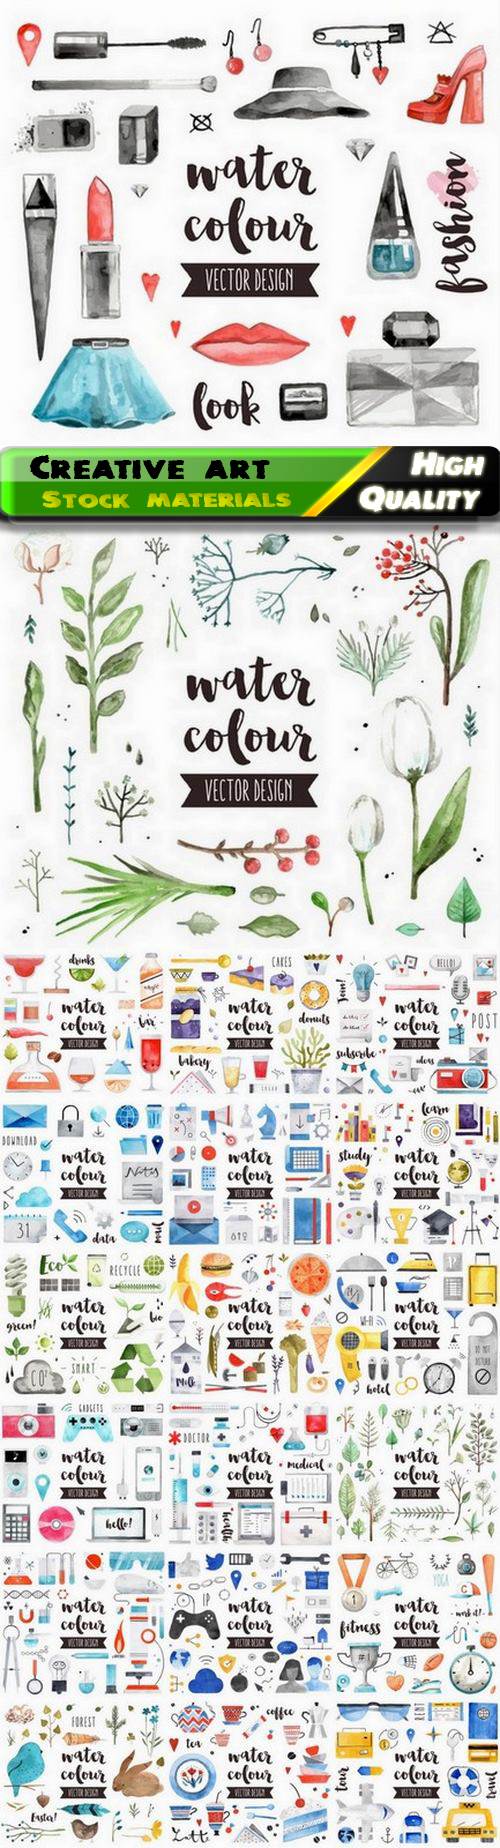 Creative art of watercolor illustration of elements and objects 20 Eps